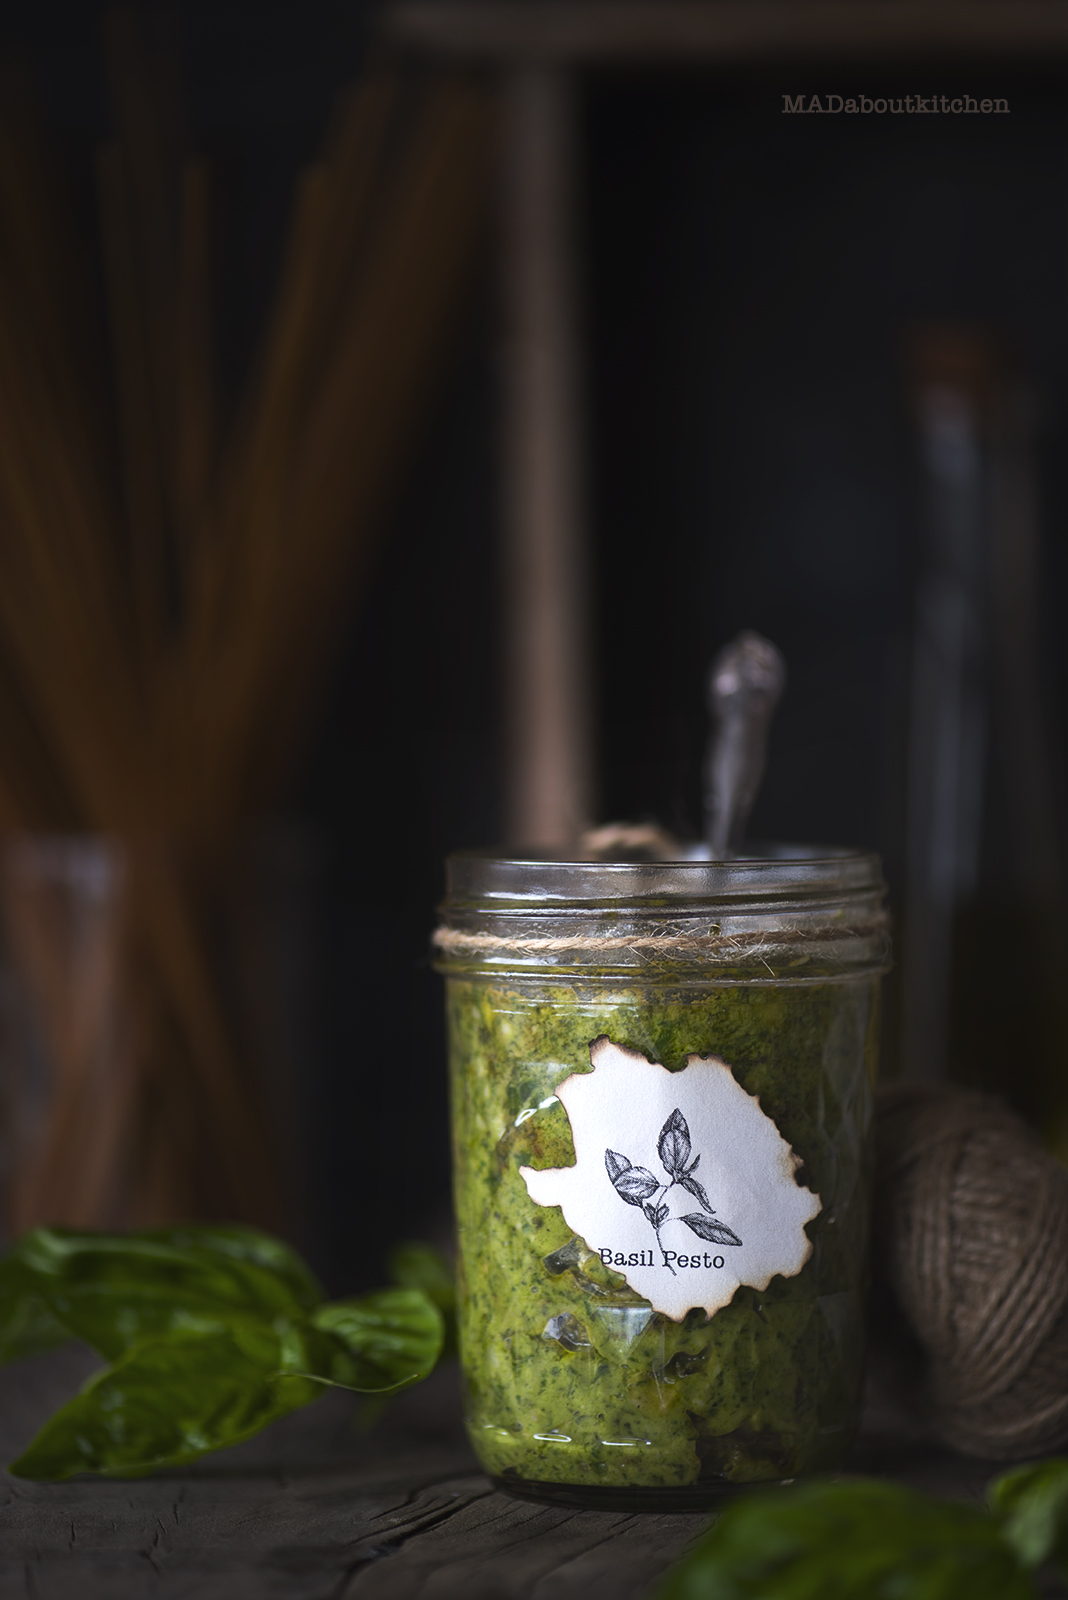 Learn how to make Basil Pesto with this easy peasy recipe using Fresh Basil leaves, Garlic, Pine nuts, Parmesan Cheese and Olive oil. Basil Pesto is one of basics in Italian dishes. 